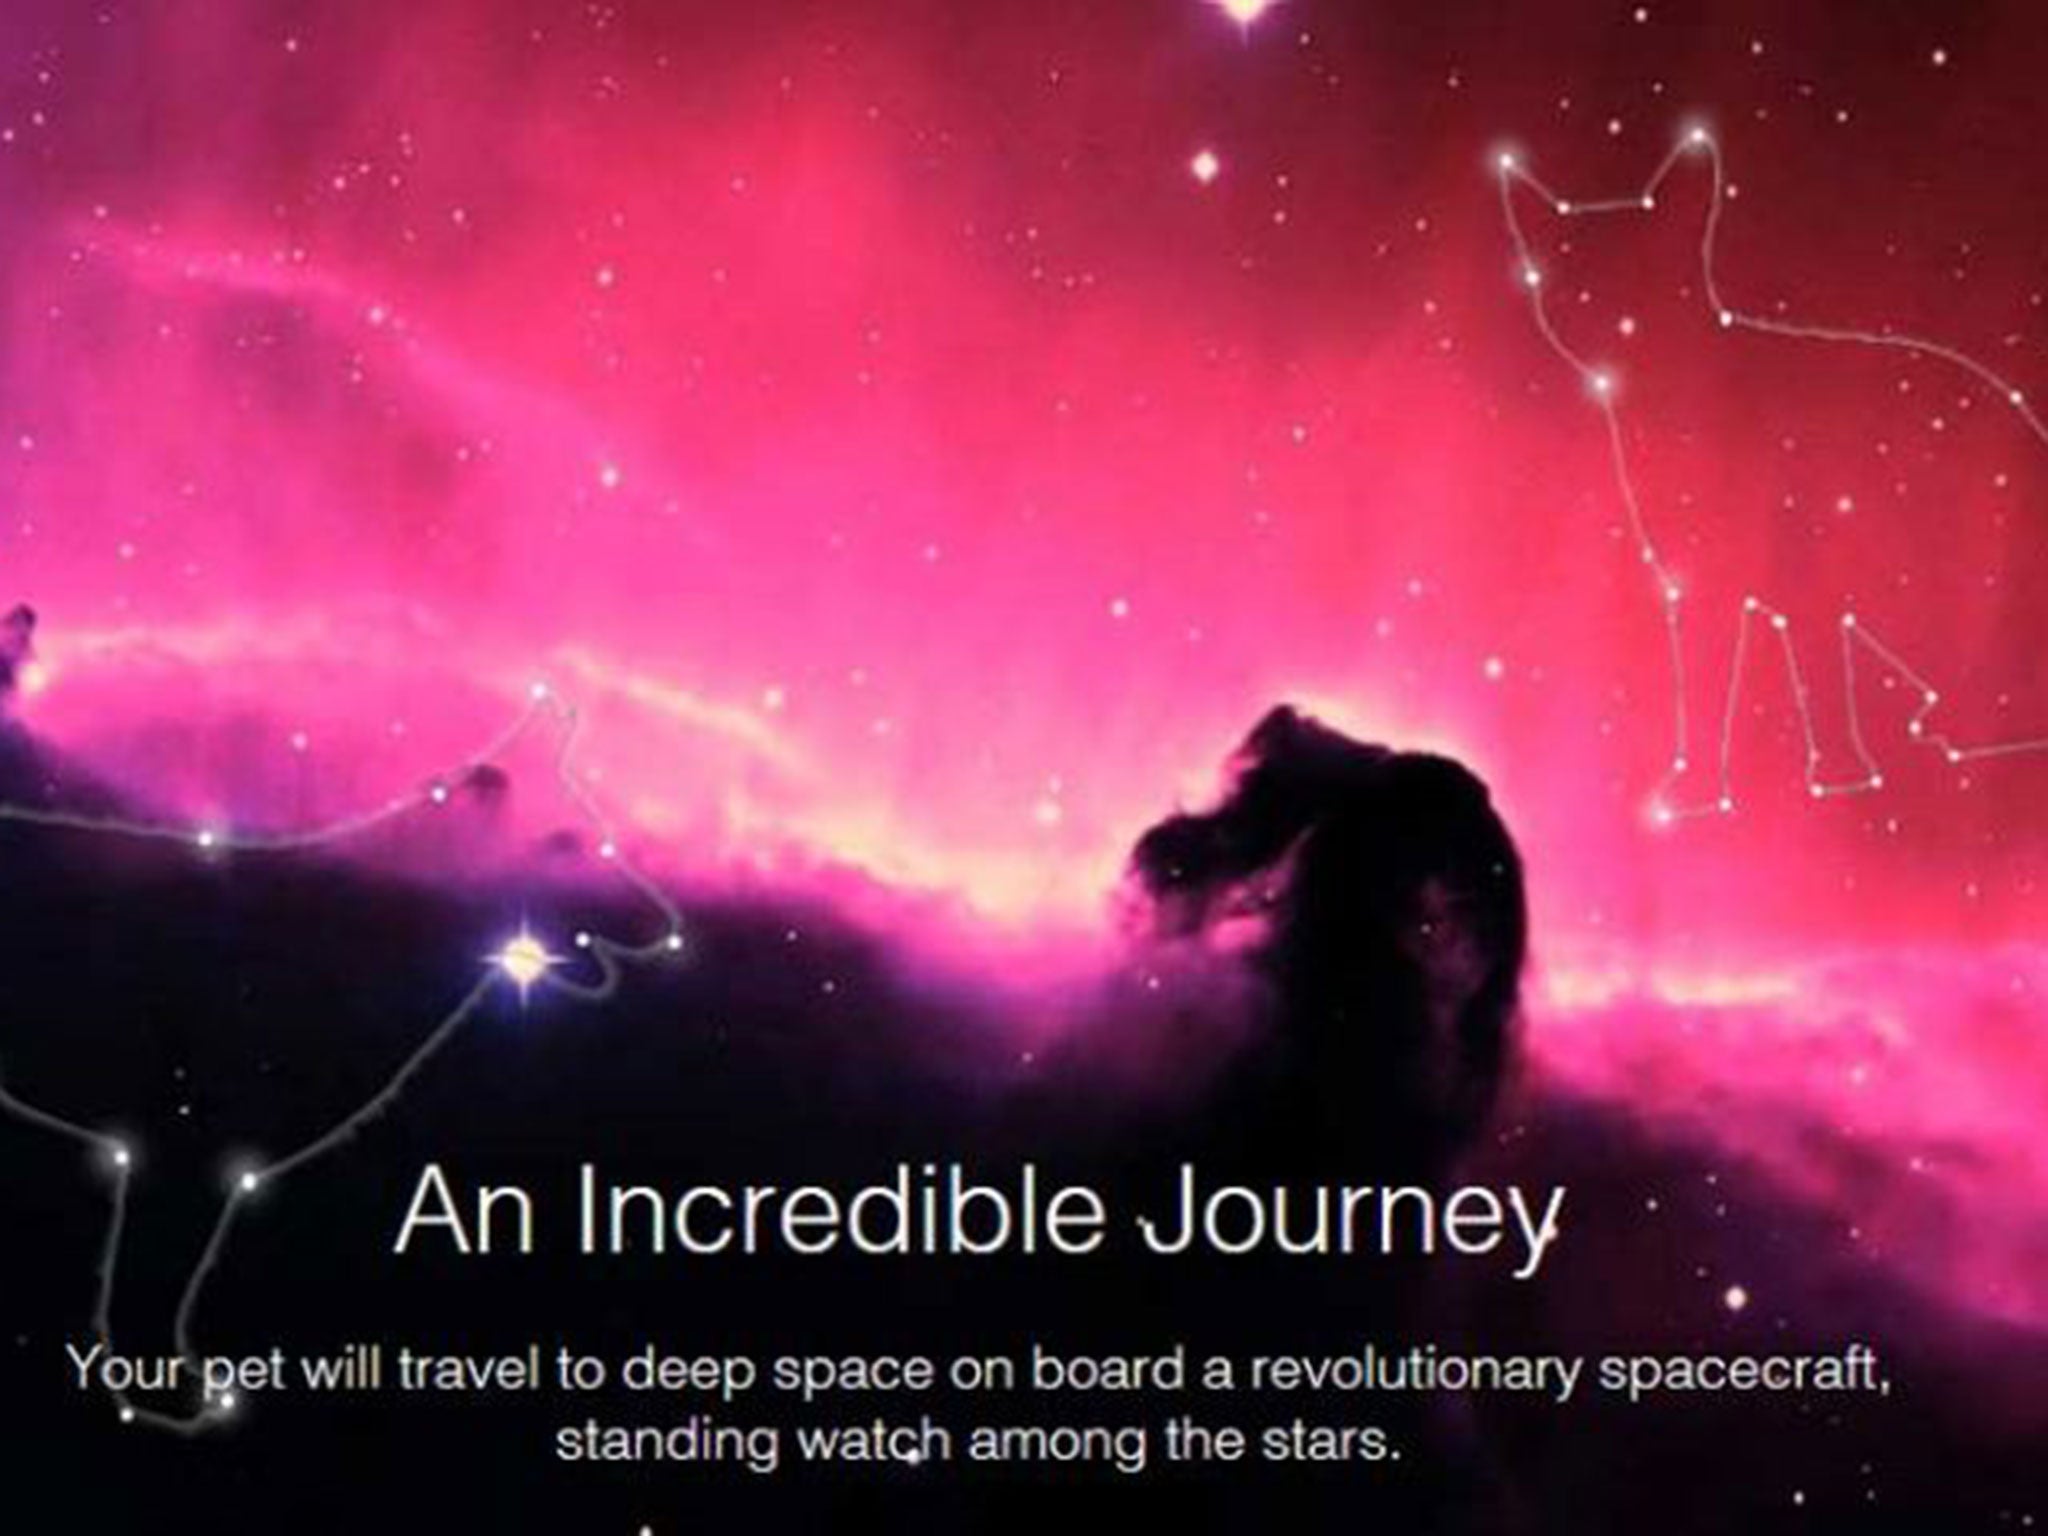 An advert tempting pet owners to send their furry loved ones into space